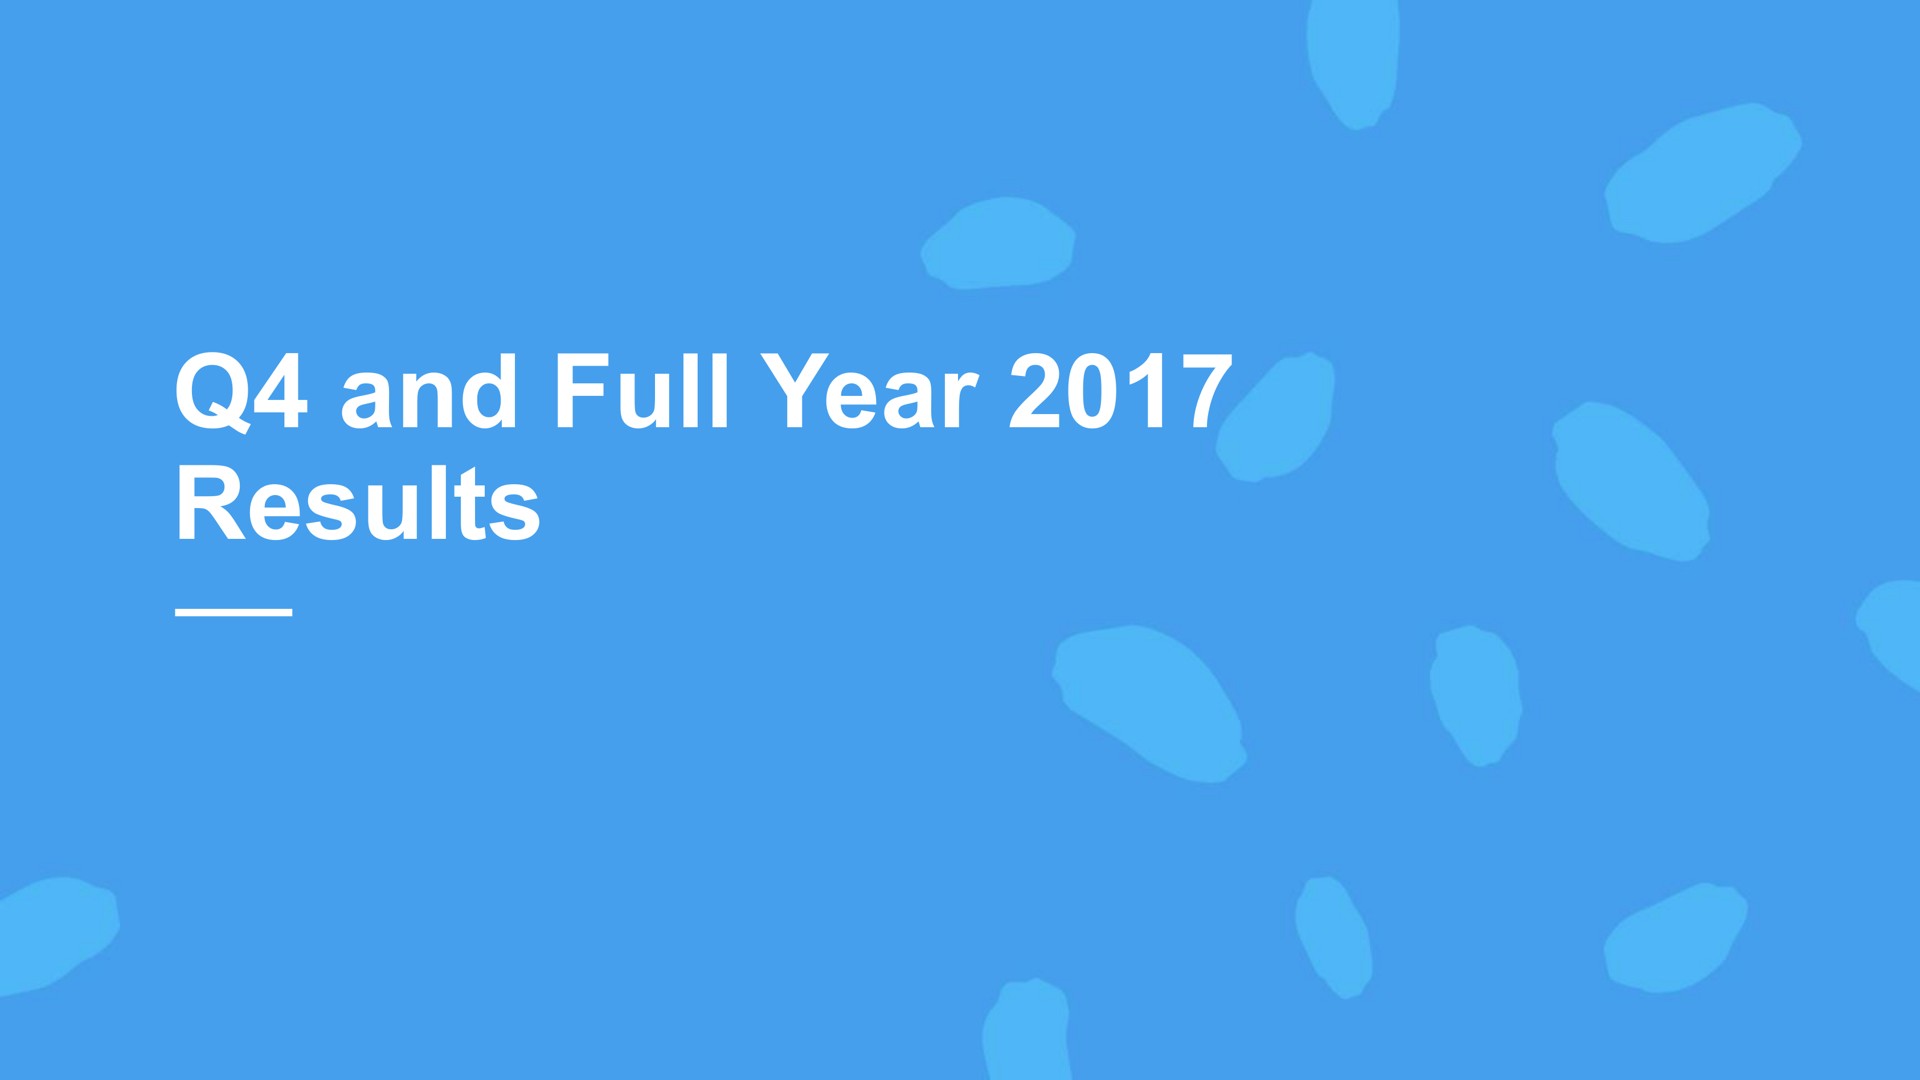 and full year results | Wix